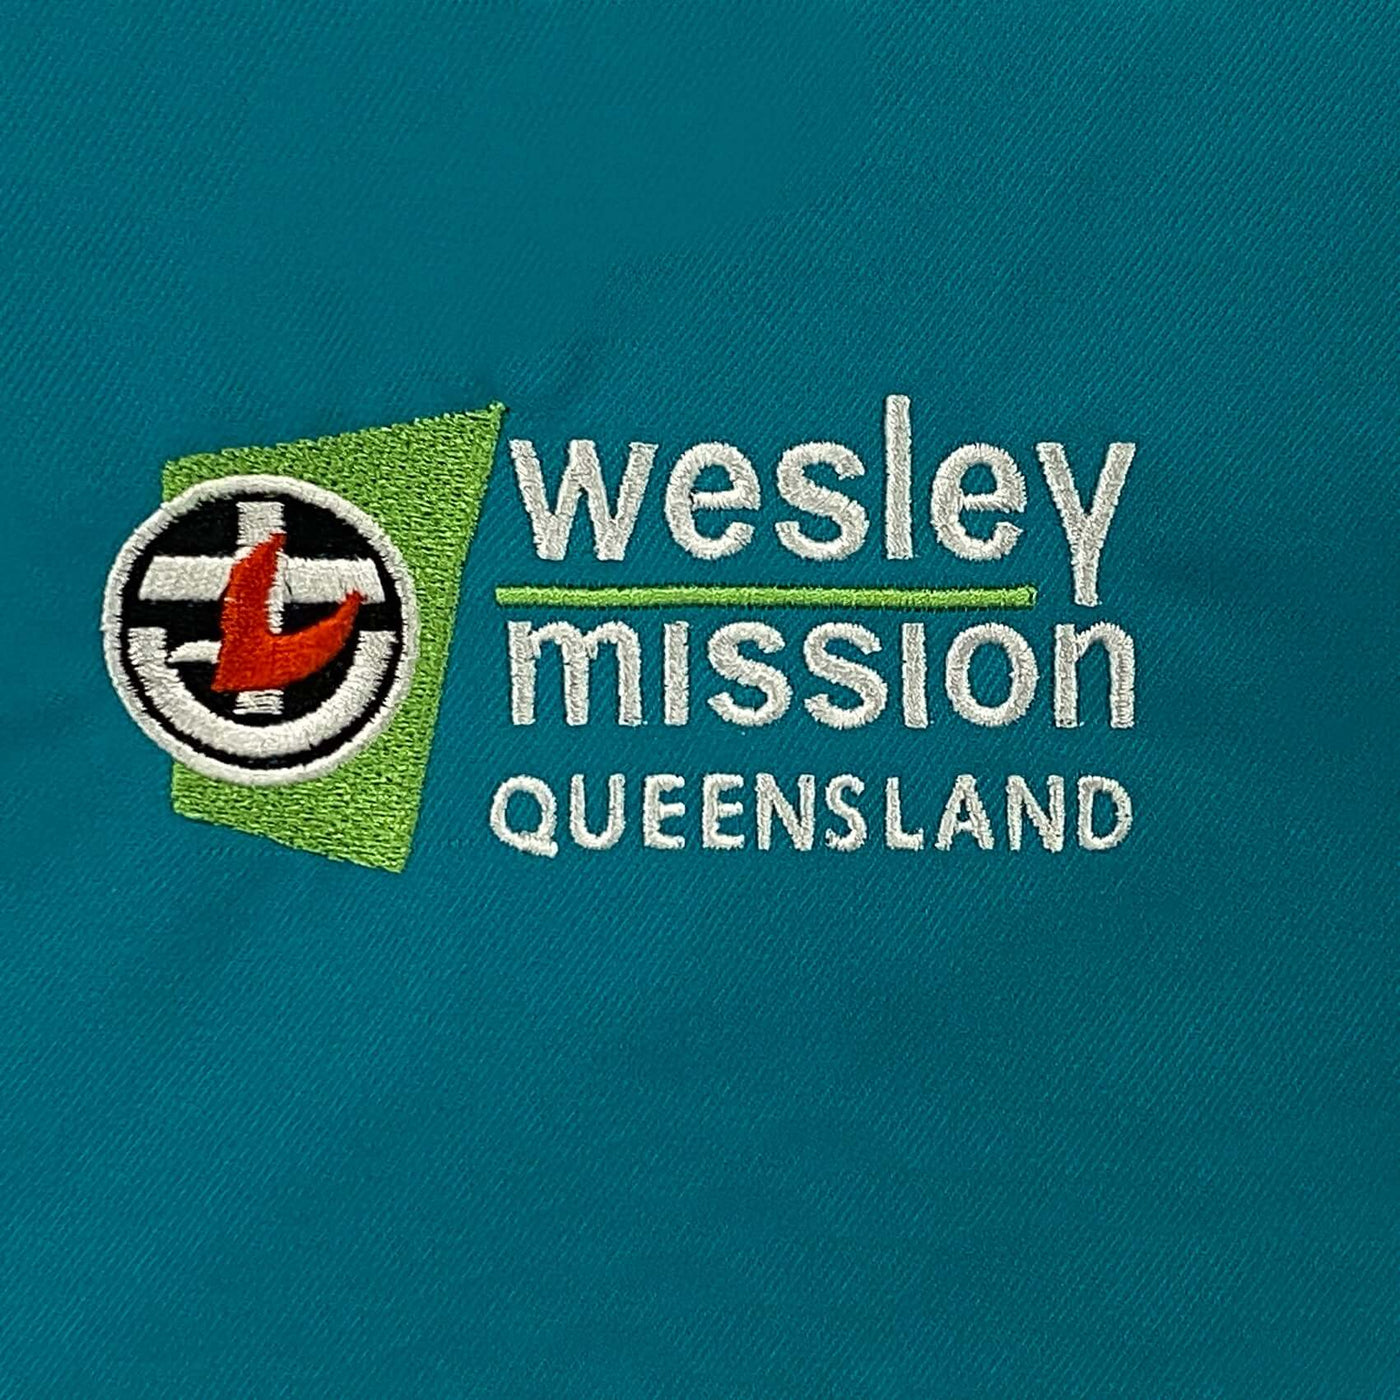 Embroidery Stock Logos - Wesley Mission Queensland